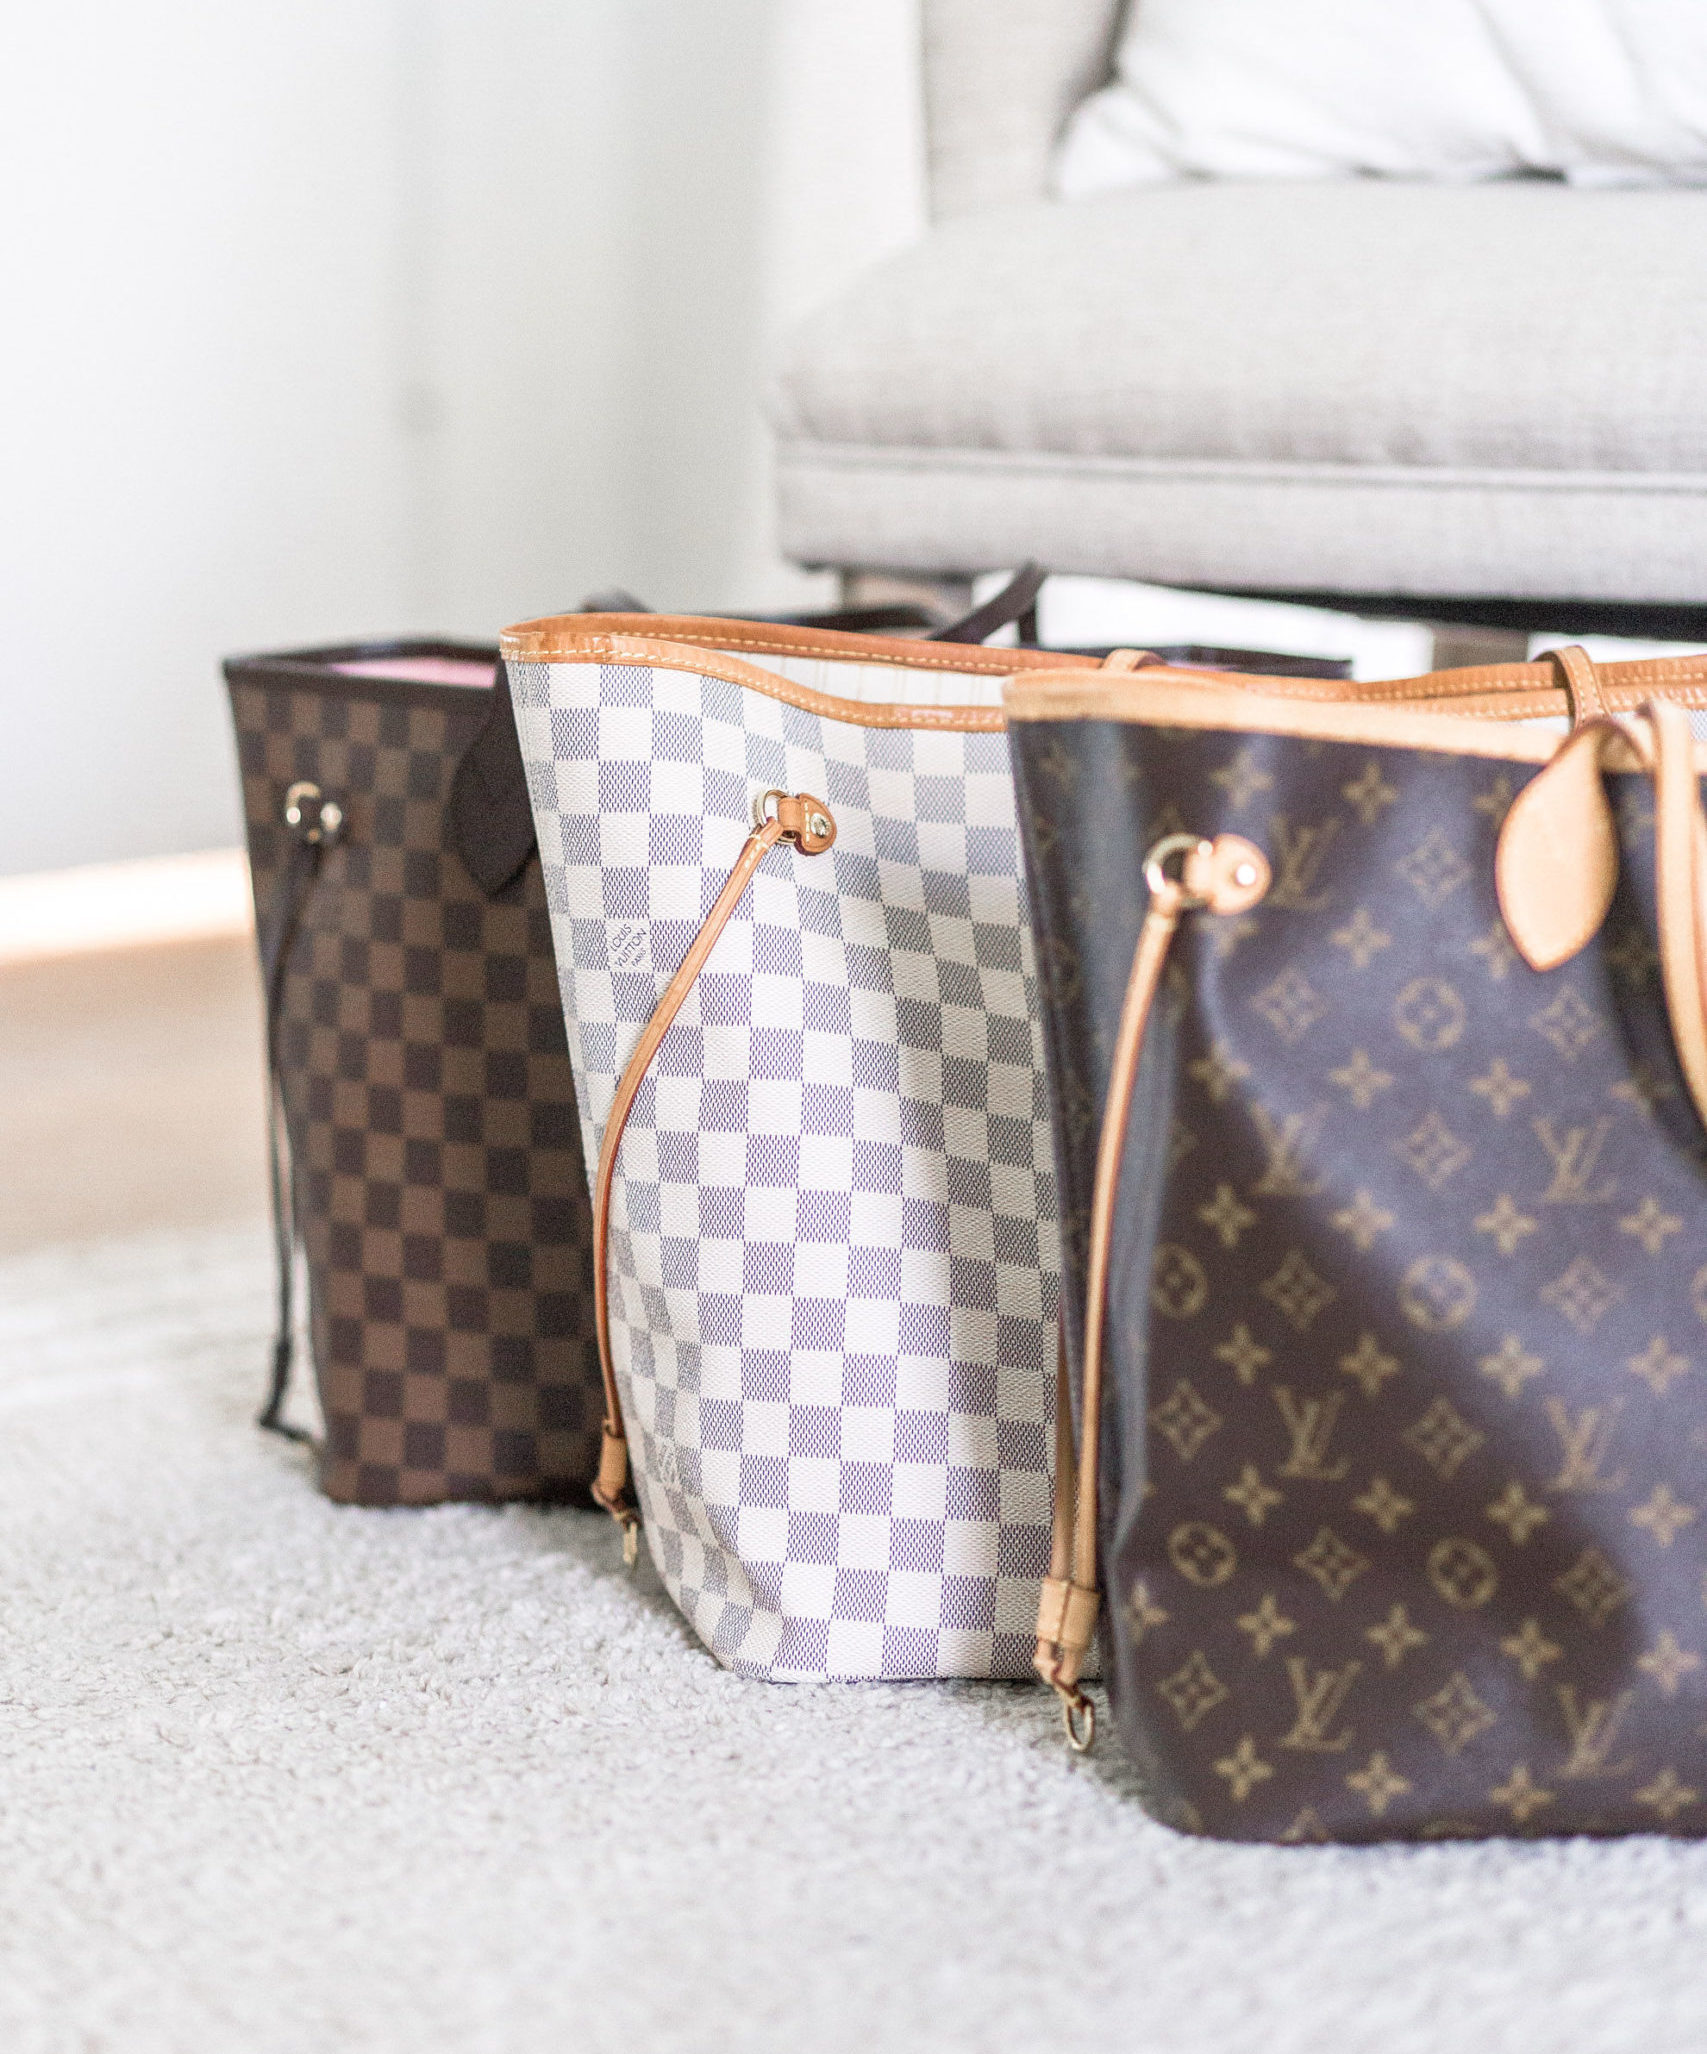 louis vuitton neverfull bag for sale